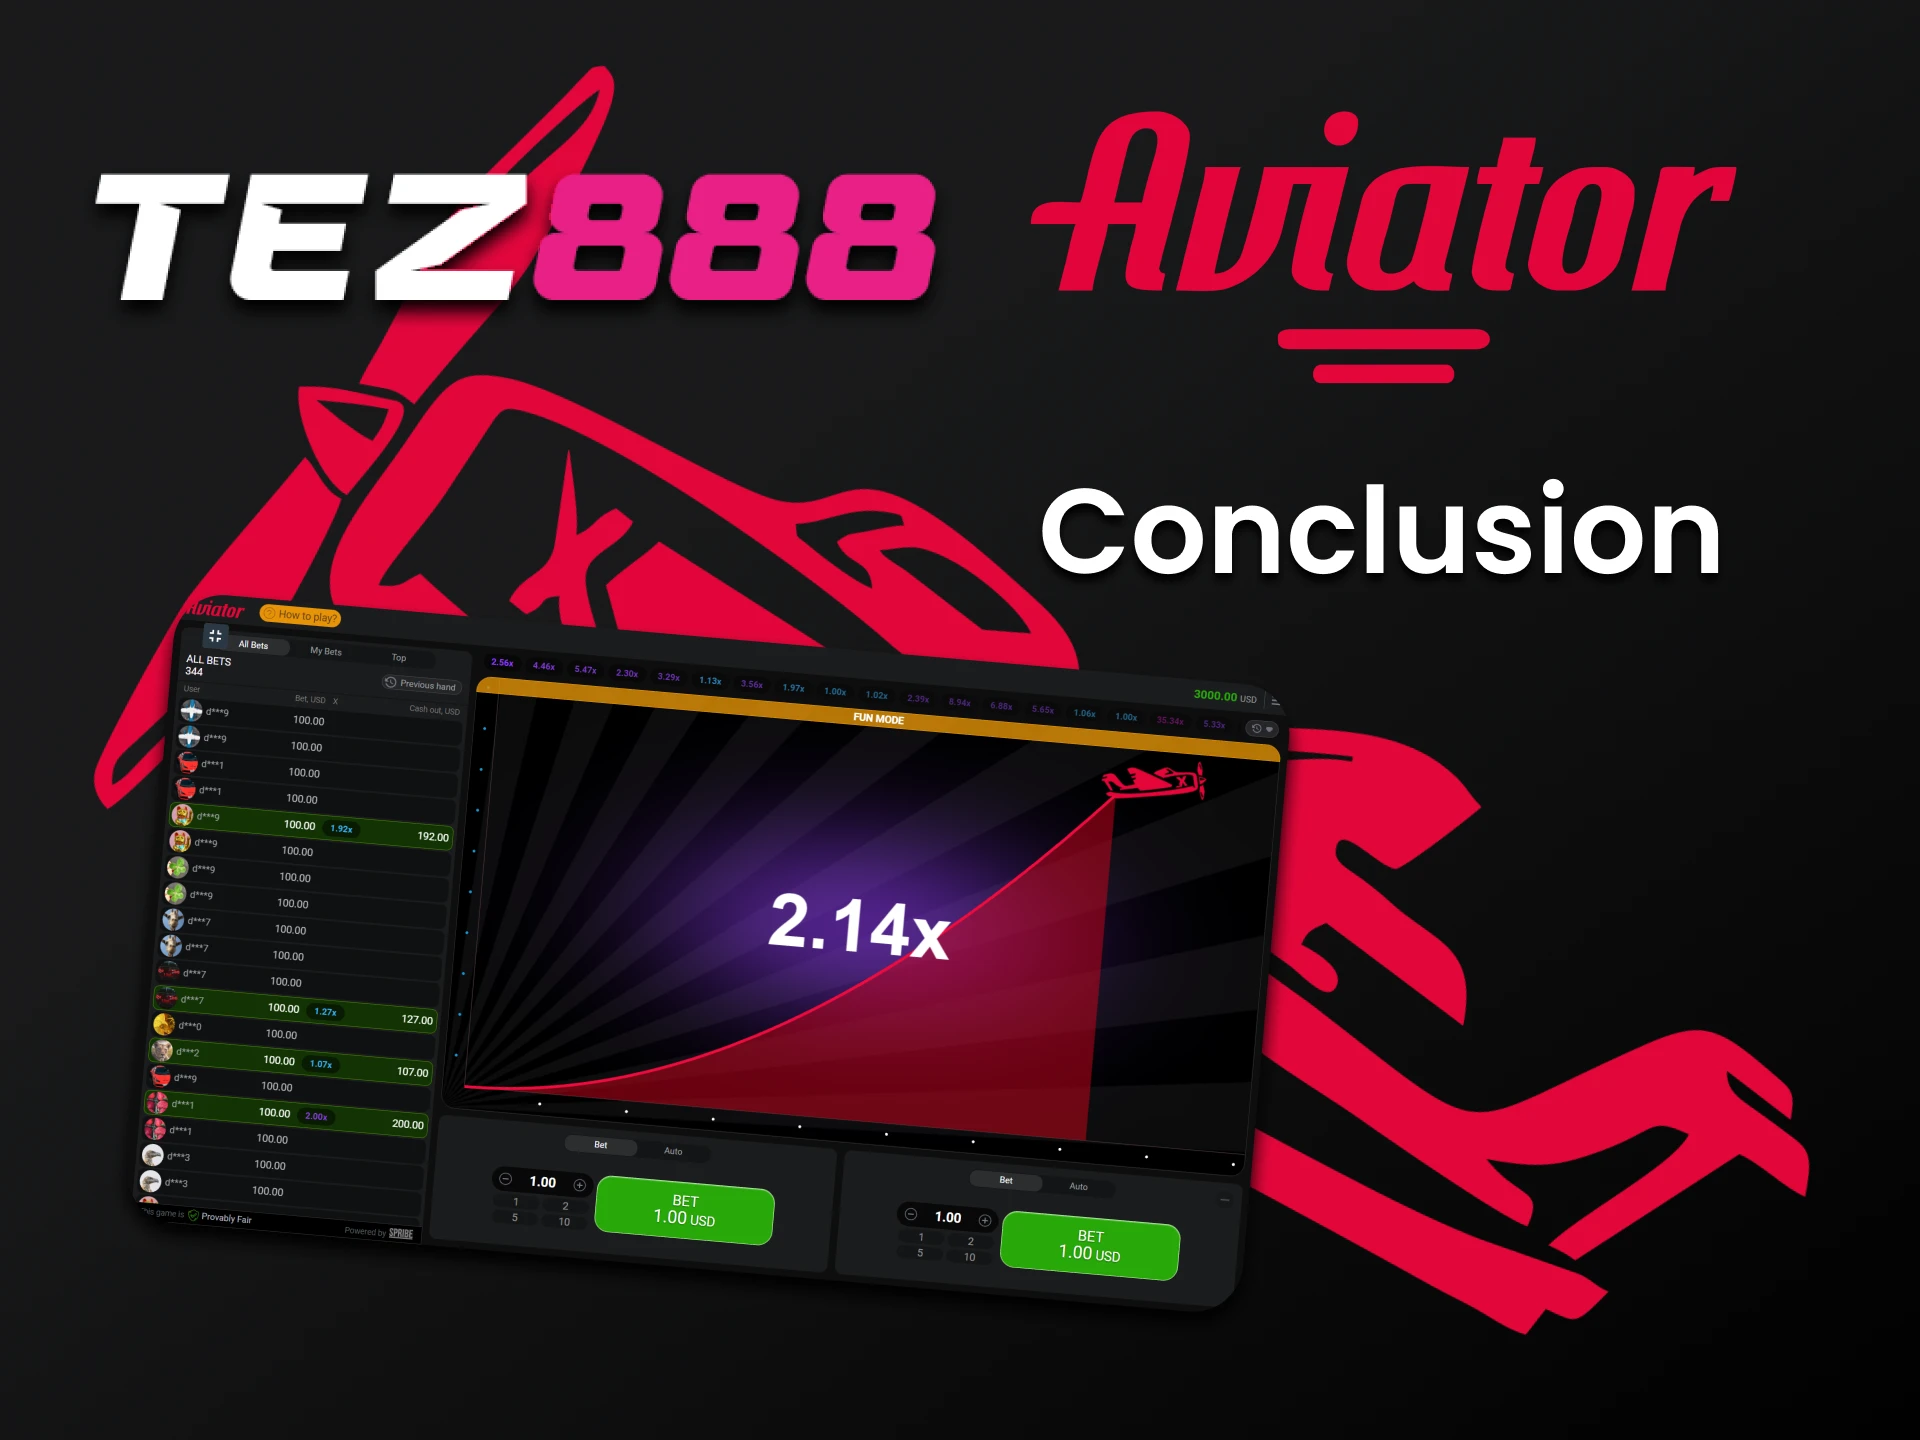 Tez888 is ideal for playing Aviator.